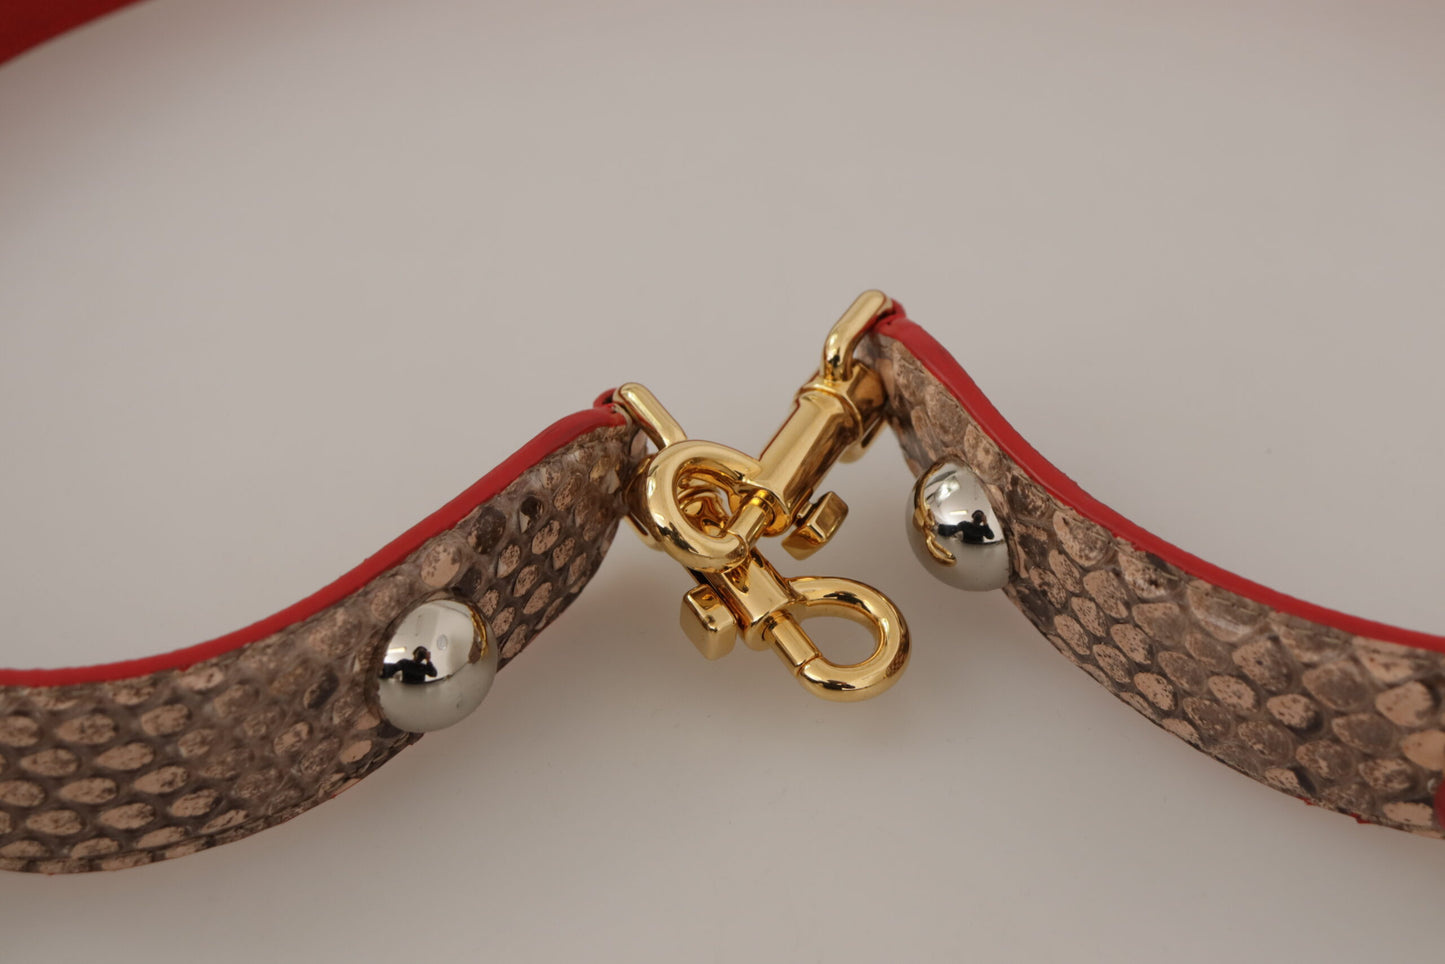 Chic Brown Python Leather Bag Strap